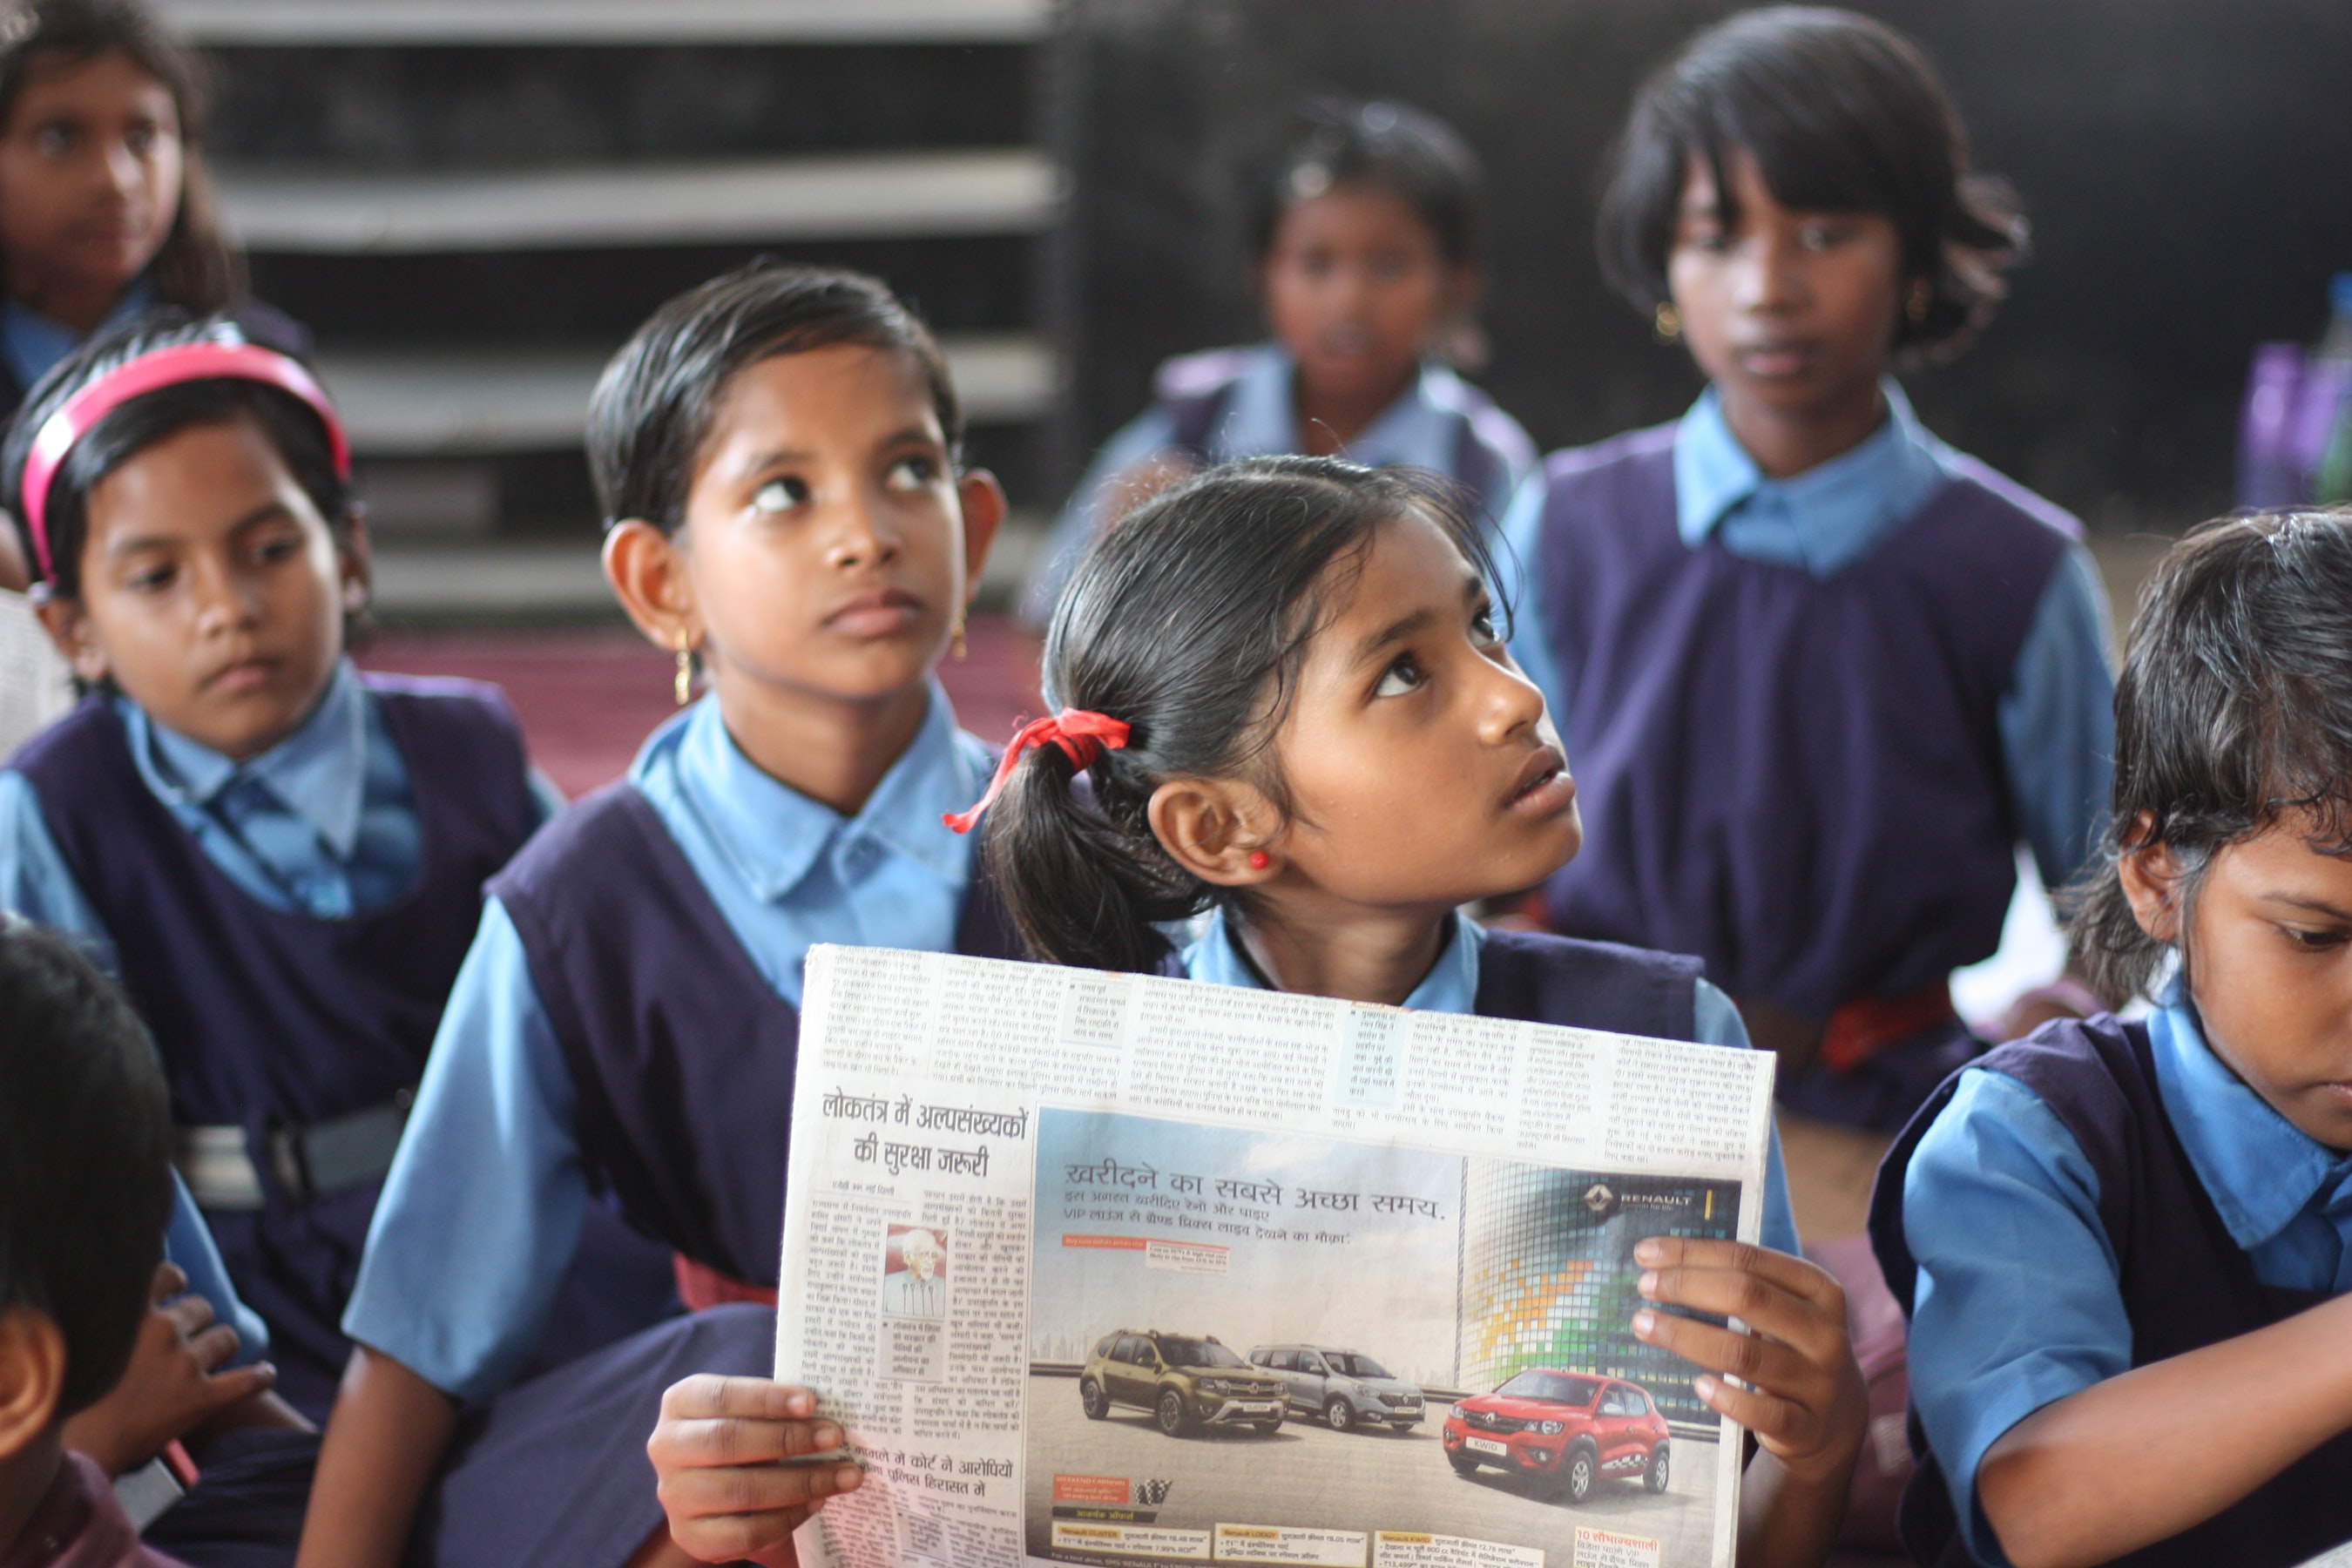 Education in India: Making room for inclusion